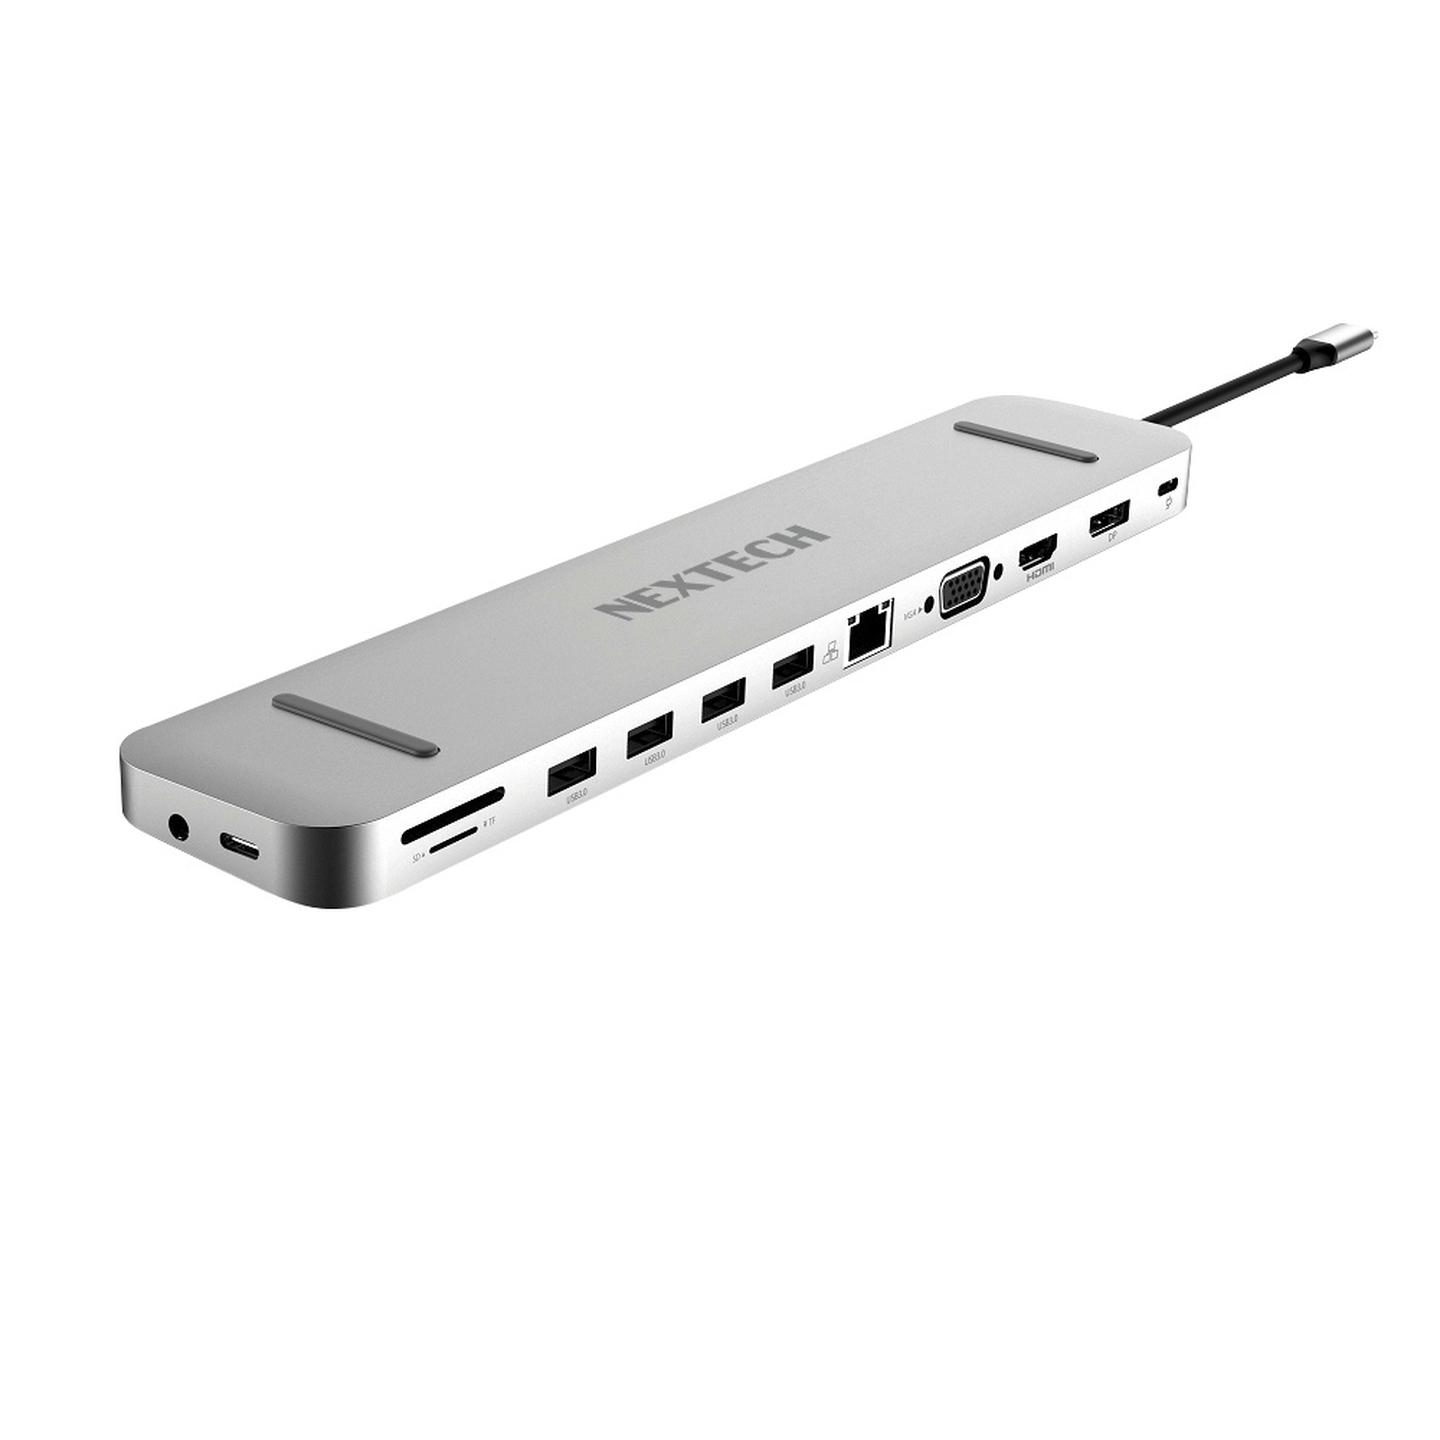 13 in 1 Multifunction USB Type-C Hub with HDMIDISPVGA Network USB Ports and USB Type-C with Power Delivery